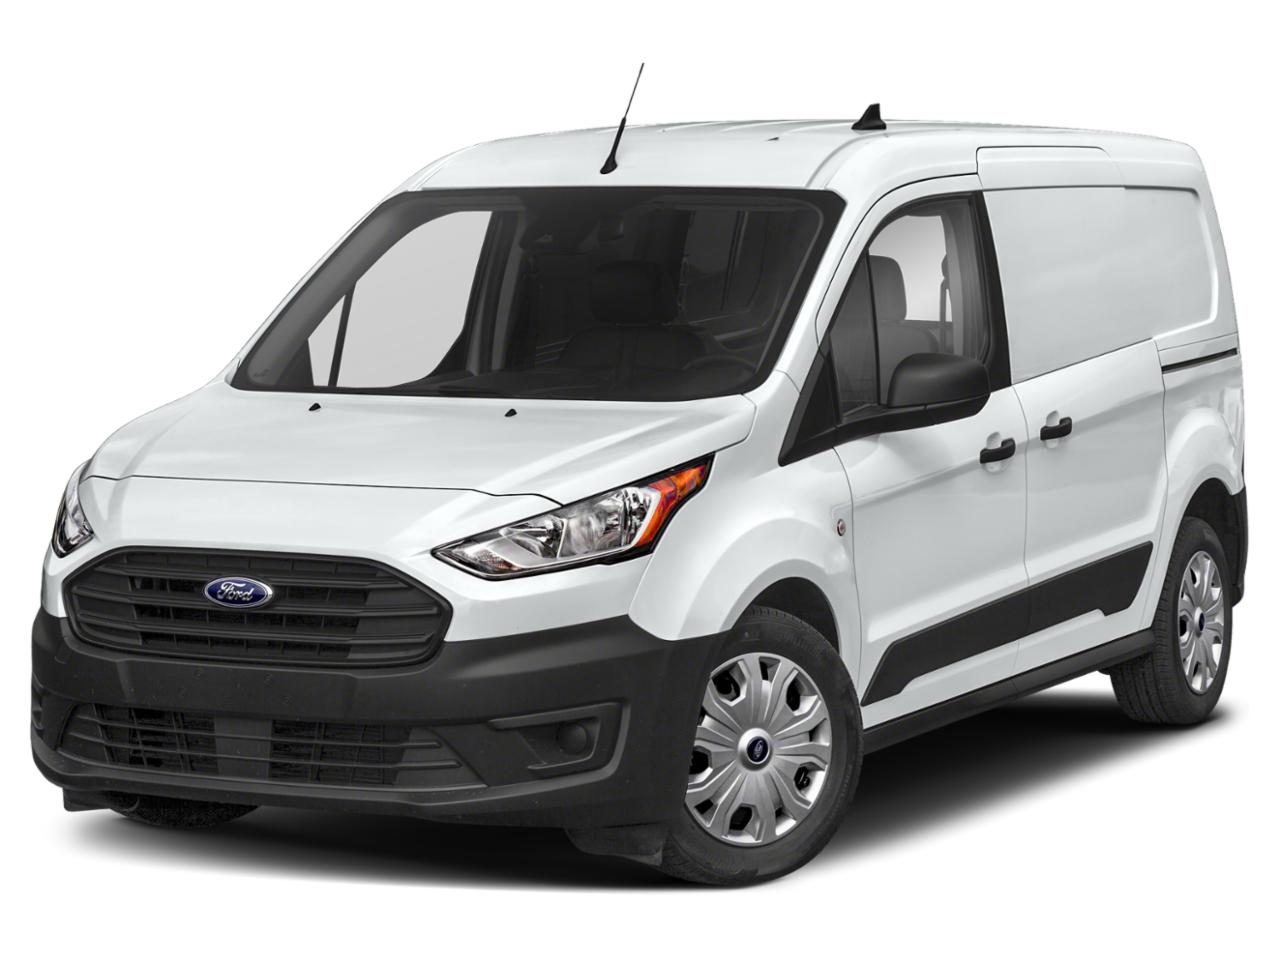 2022 Ford Transit Connect Van Vehicle Photo in Denison, TX 75020